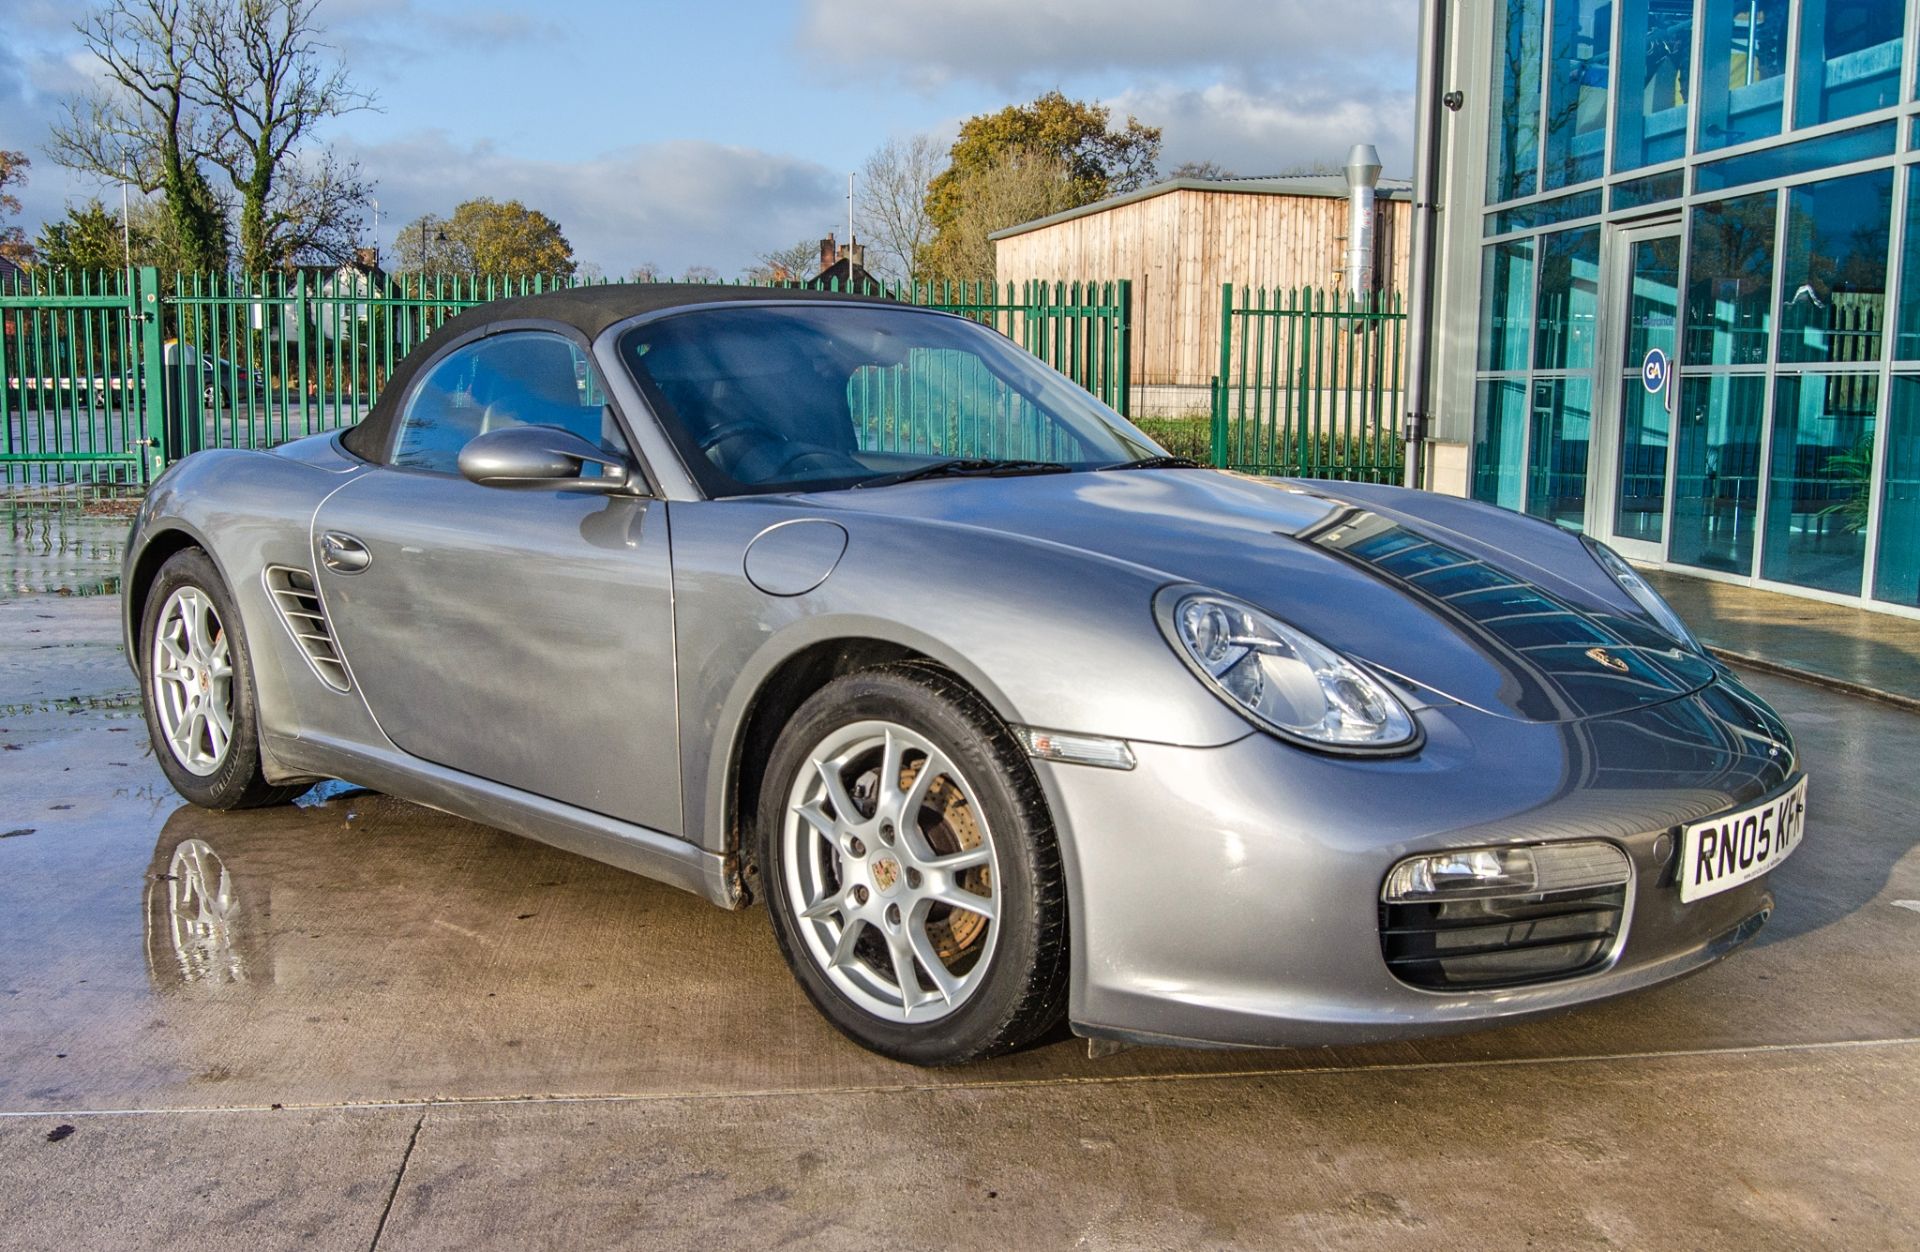 Porsche Boxster 2.7 litre 5 speed manual convertible roadster Registration Number: RN05 KFK Date - Image 2 of 45